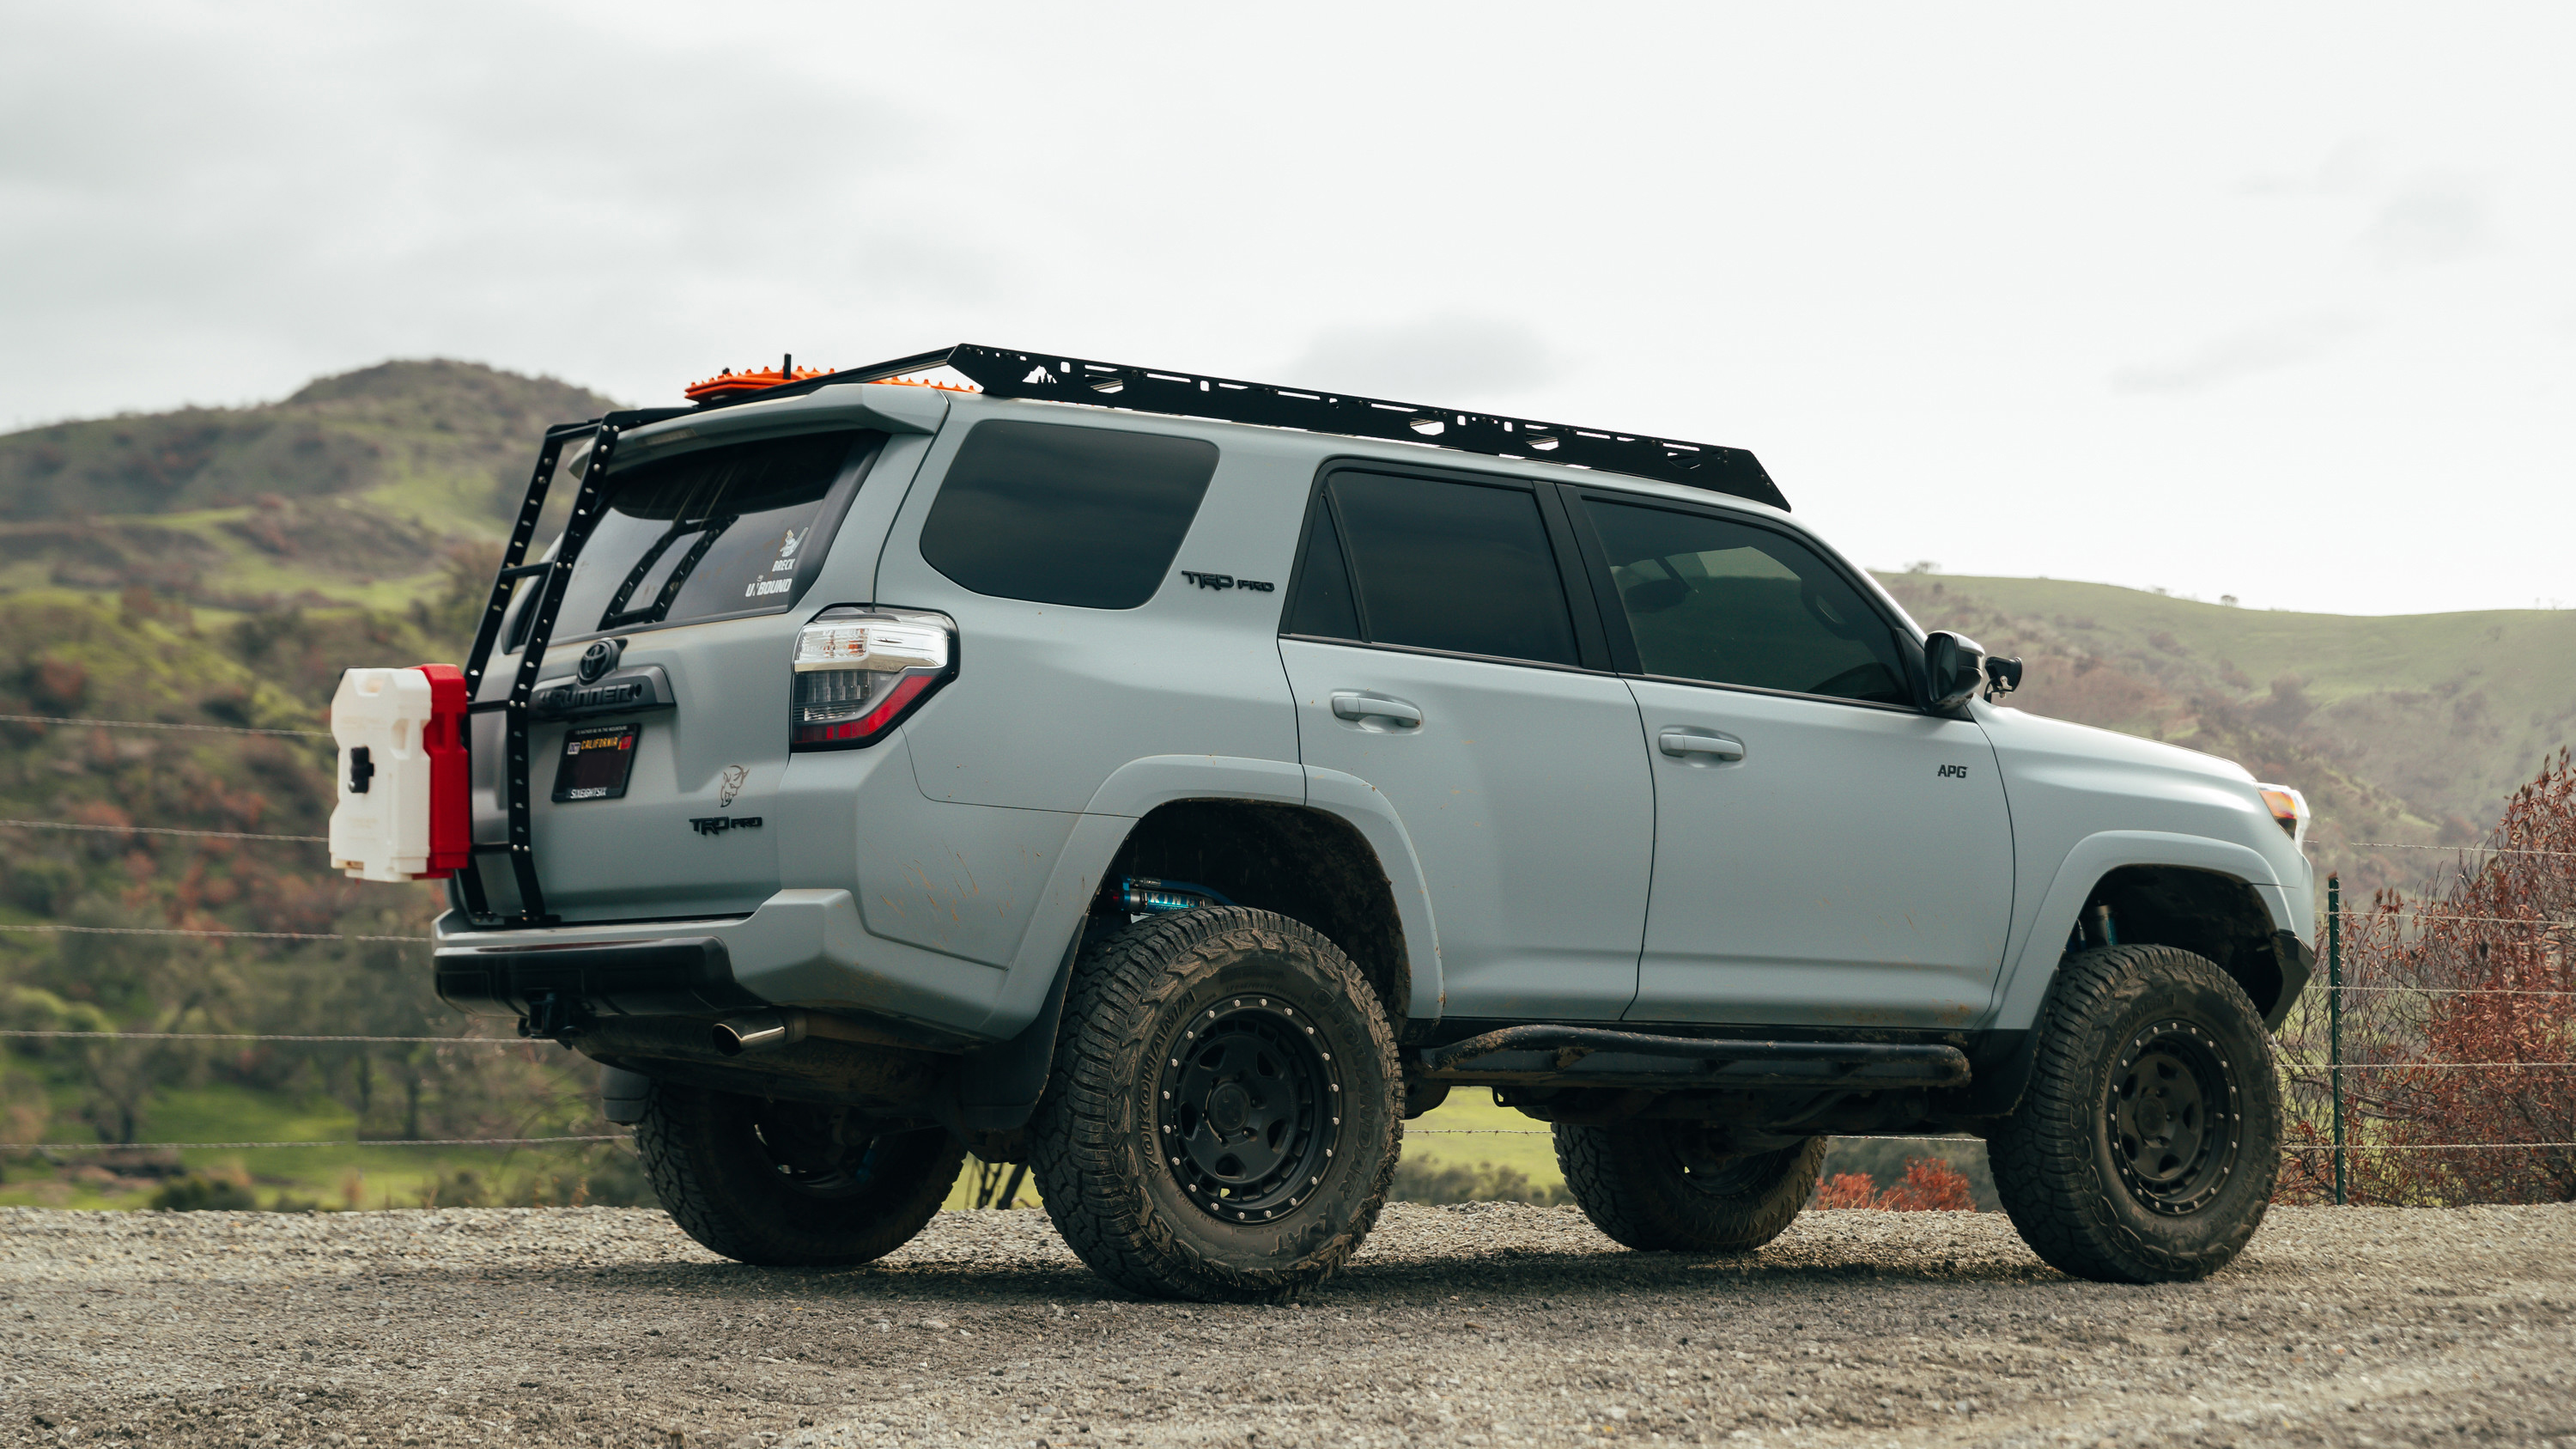 5th Gen Toyota 4Runner Roof Rack with ladder and jerry cans